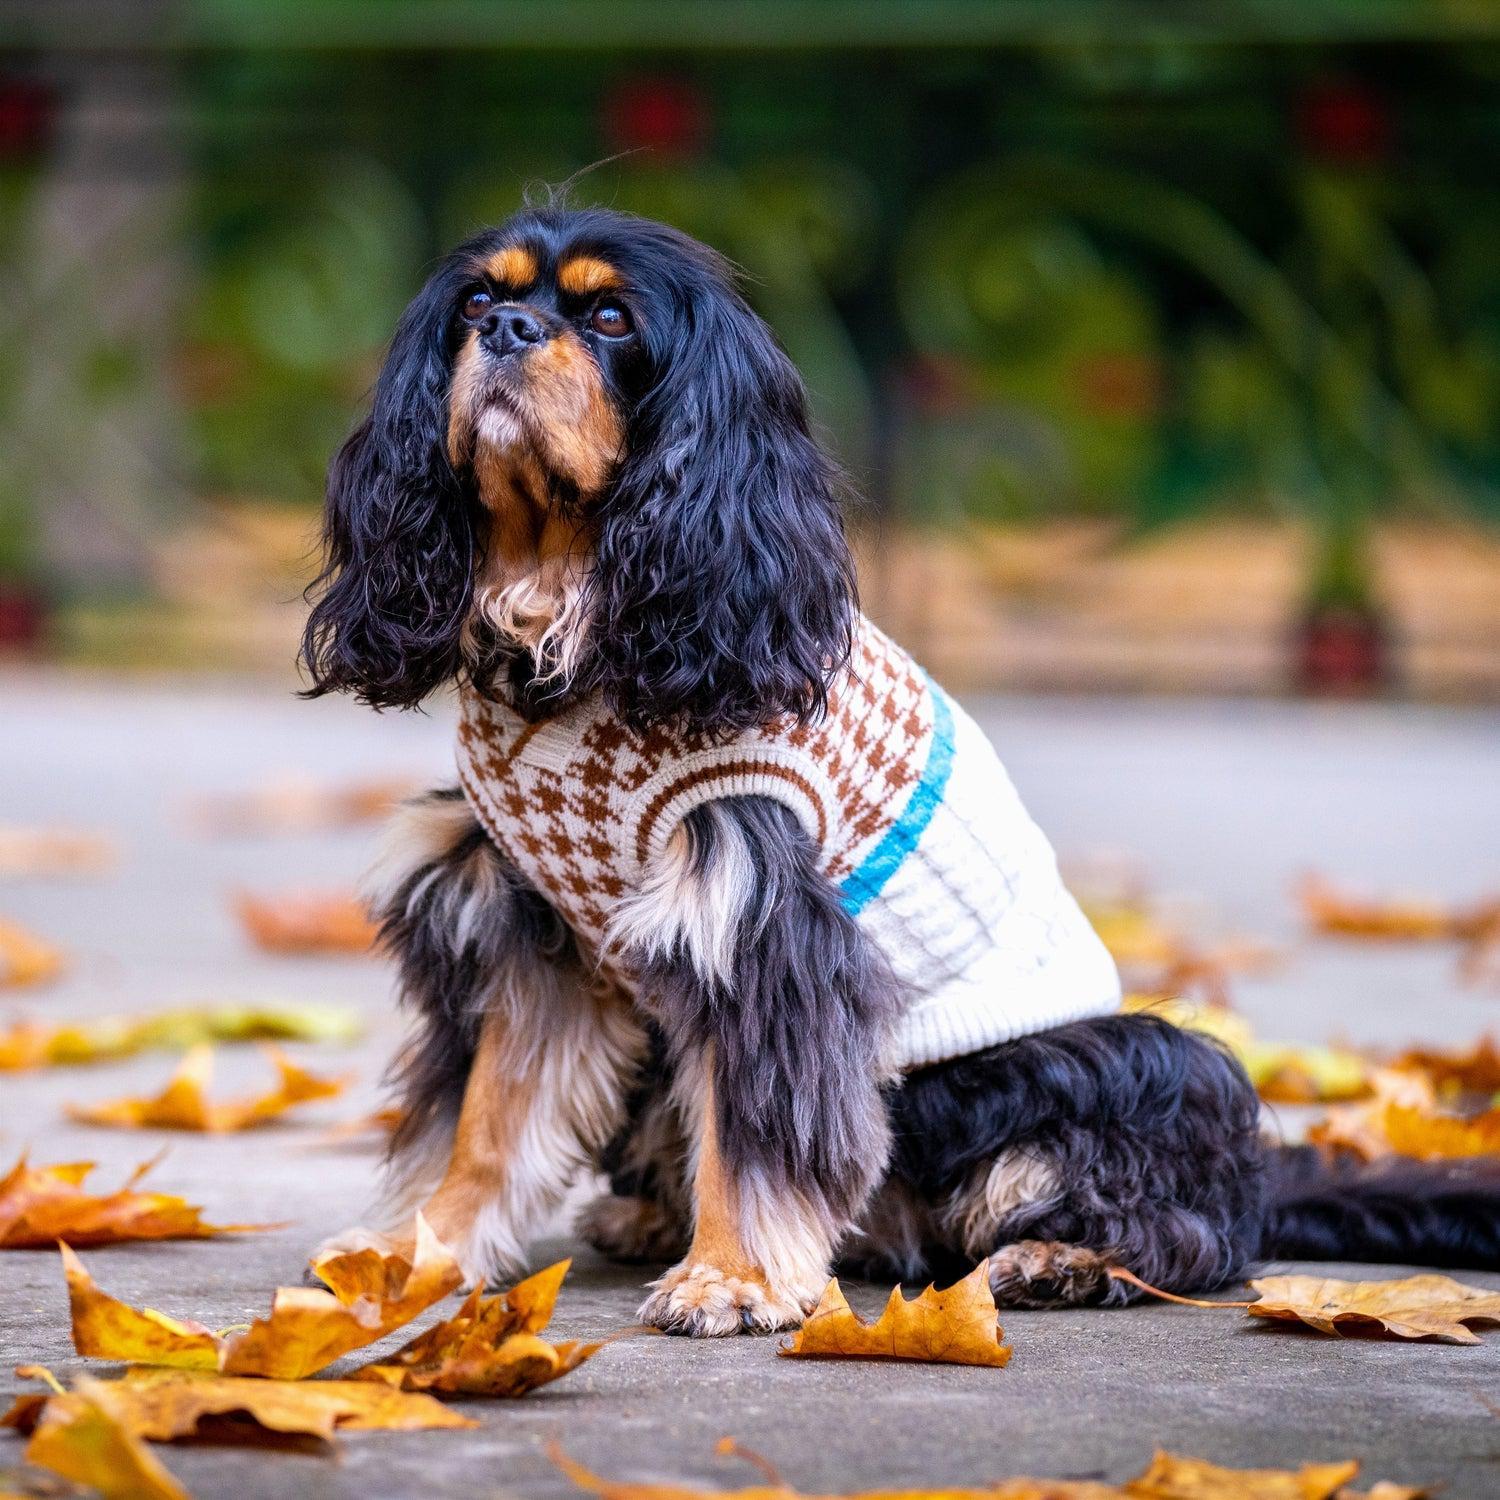 Oxford Style Dog Sweater